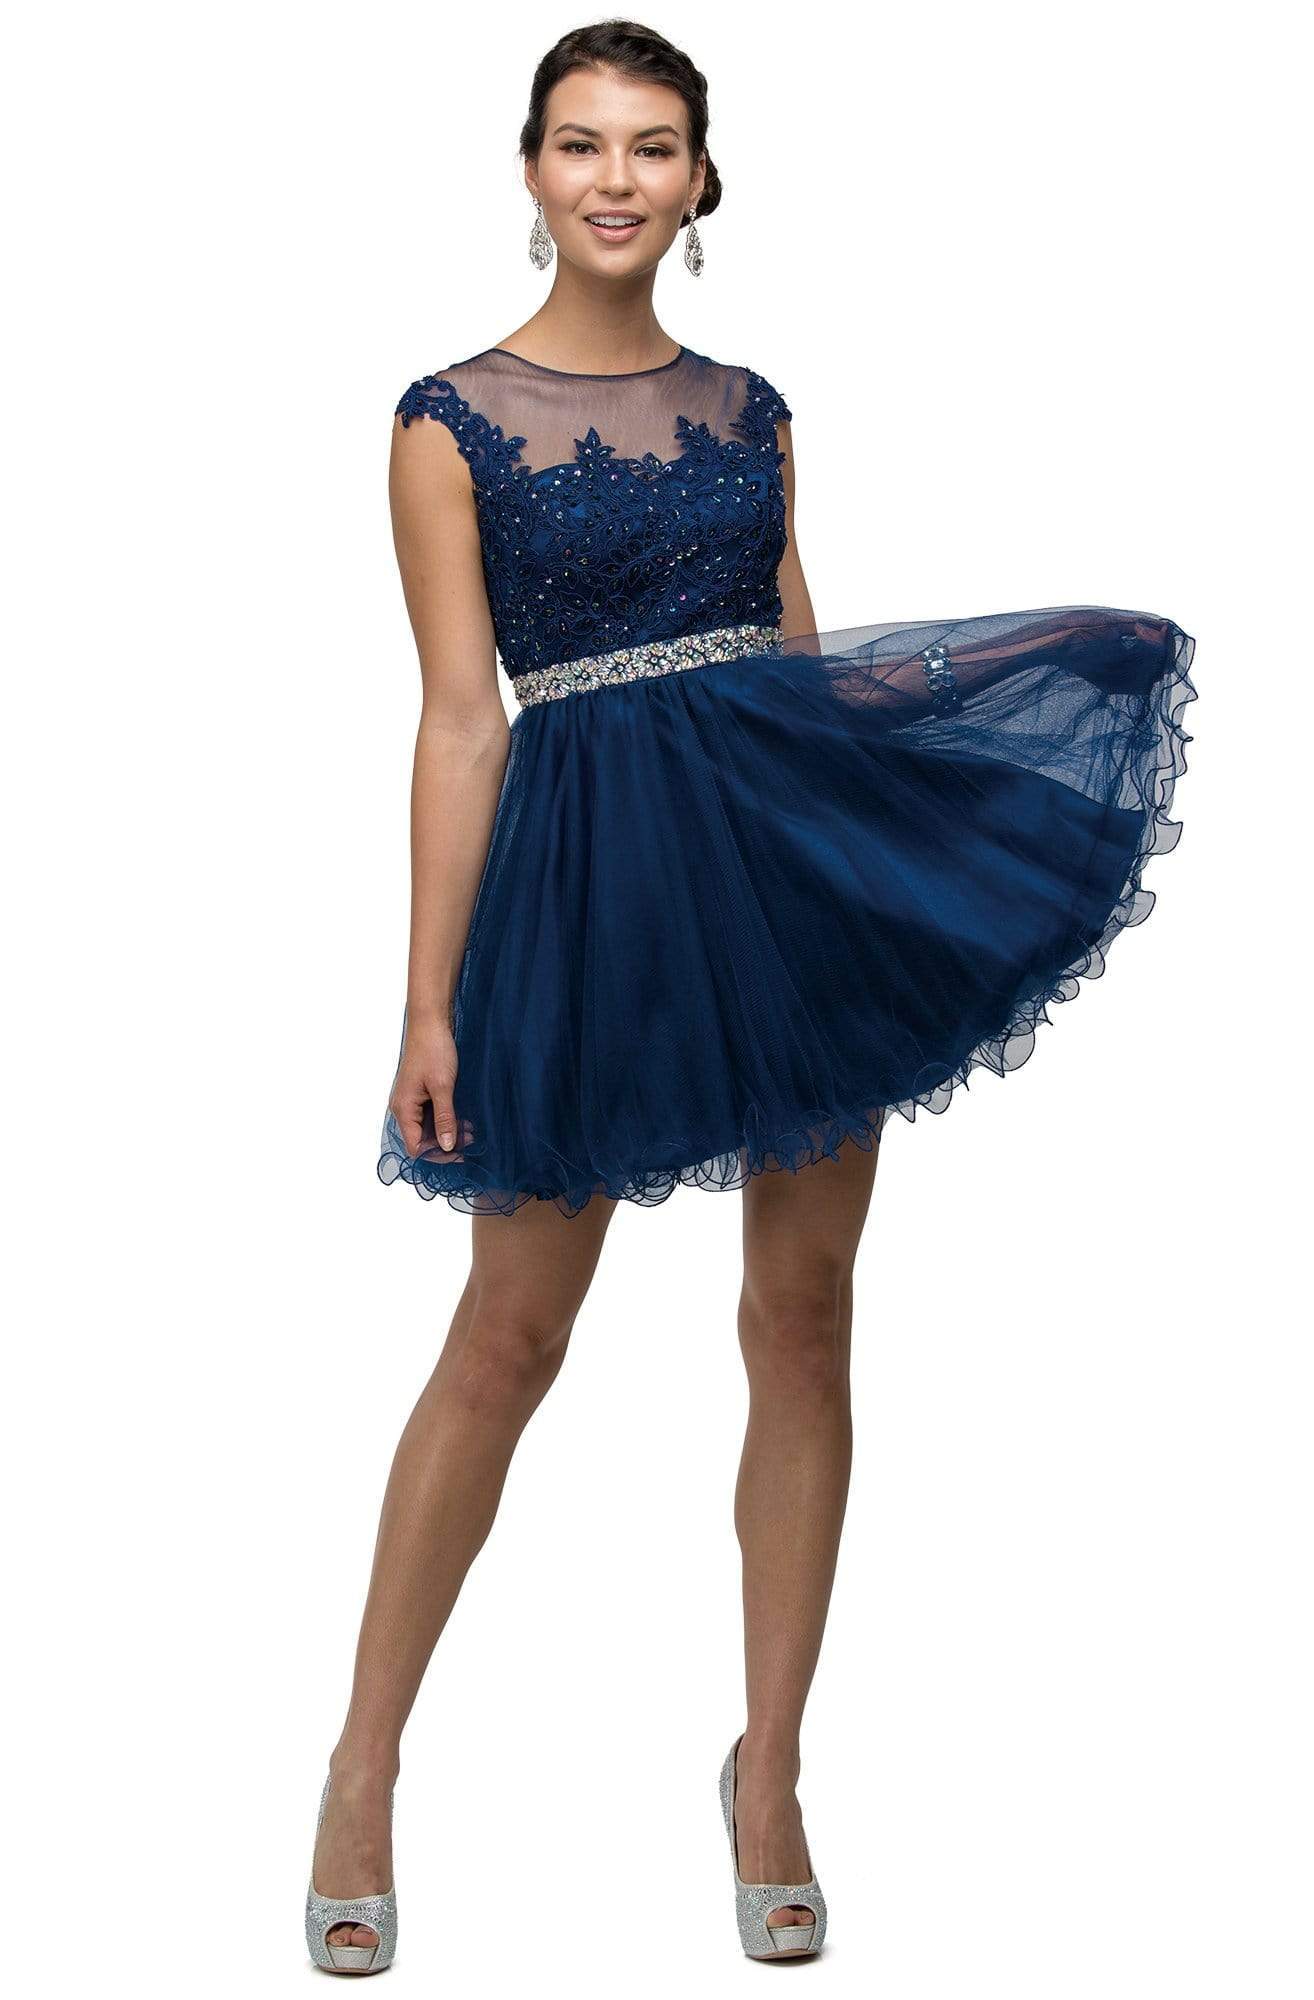 Dancing Queen - 9489 Lace Applique A-line Cocktail Dress Homecoming Dresses XS / Navy